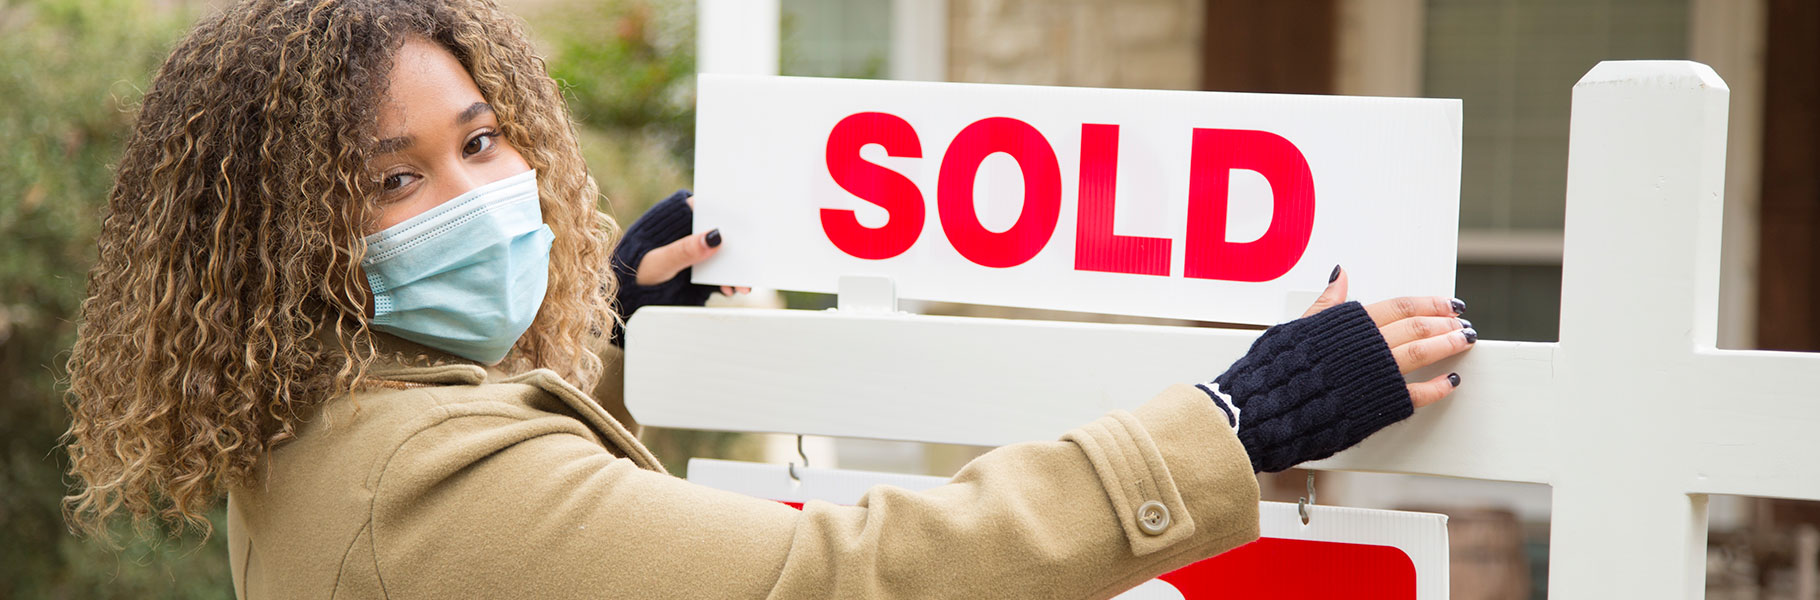 Woman putting sold on real estate sign